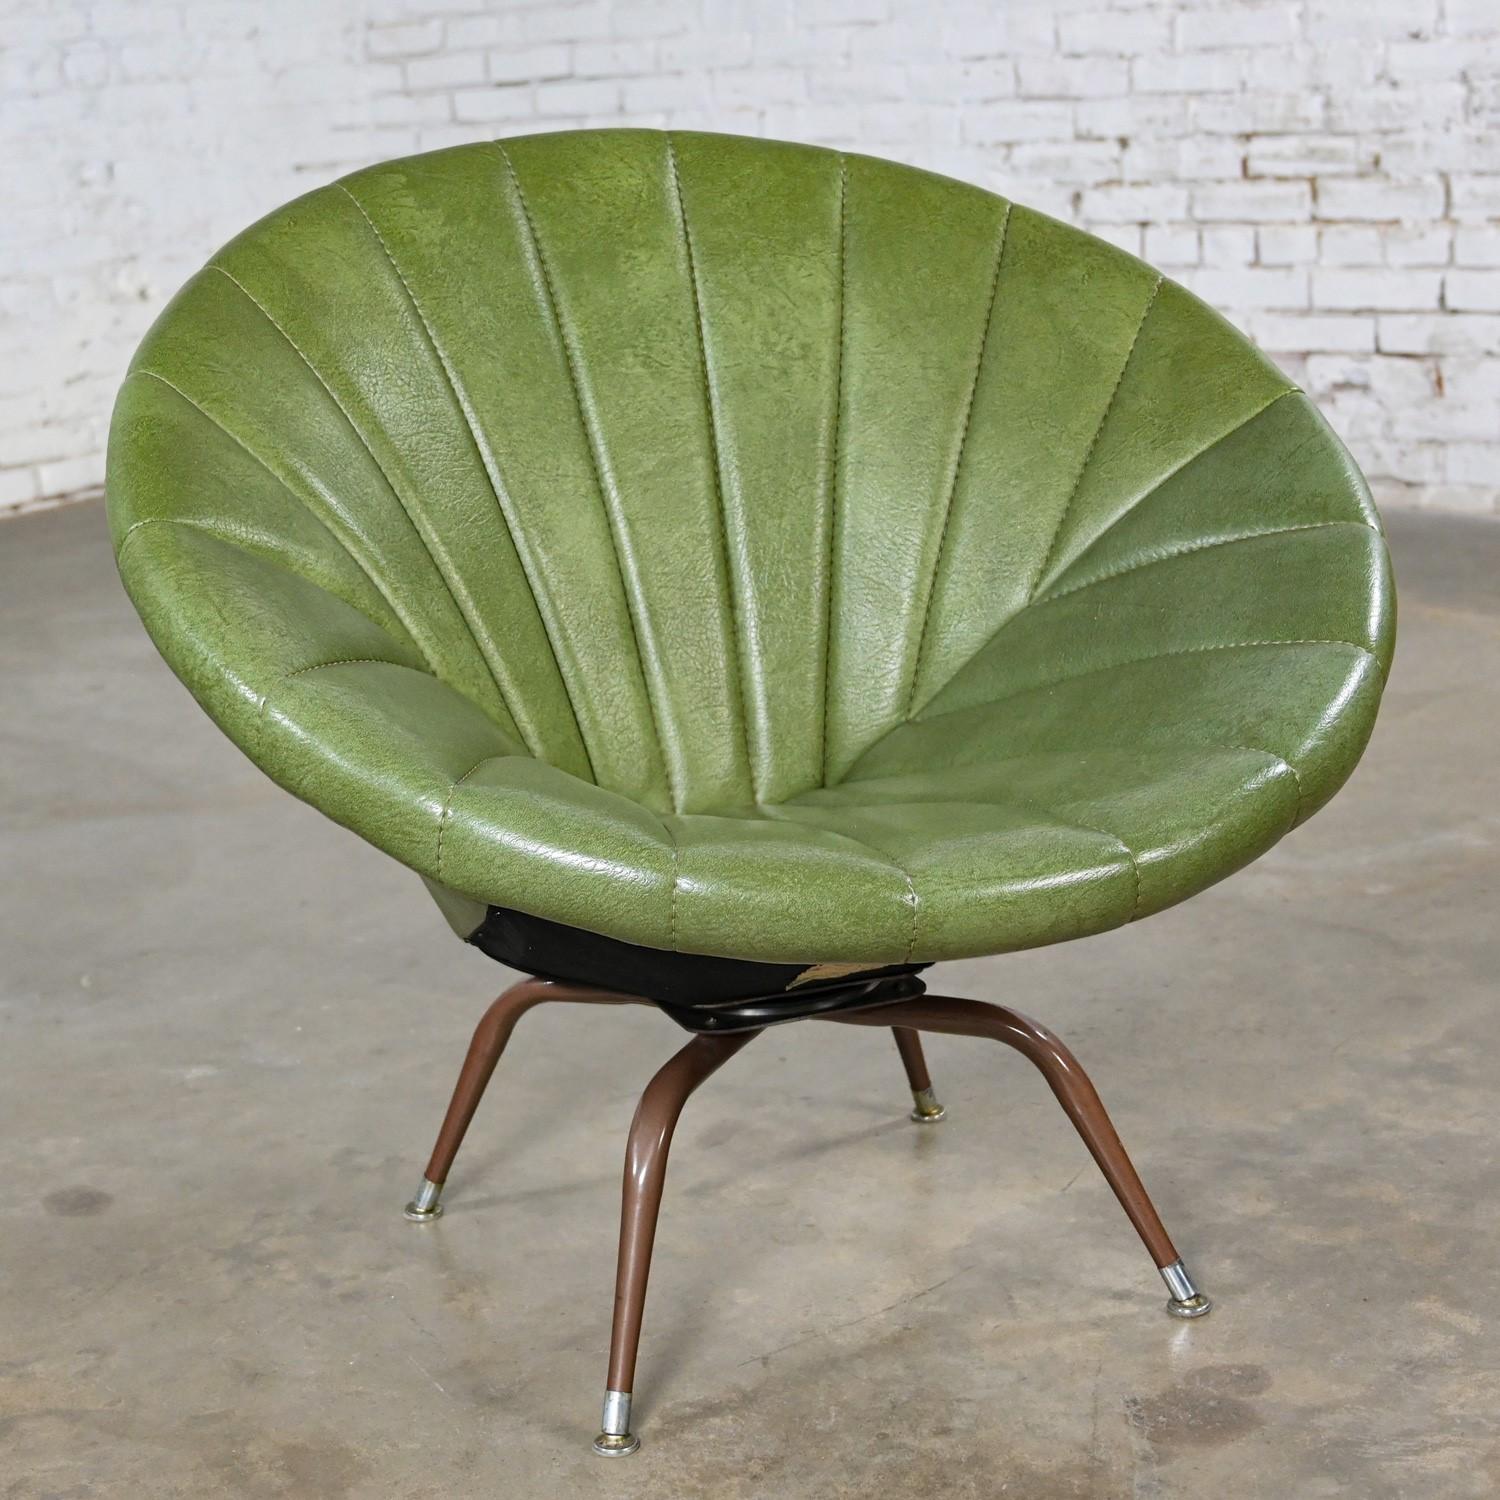 American Mid Century Modern Green Faux Leather Tub or Saucer Swivel Chair with Metal Base